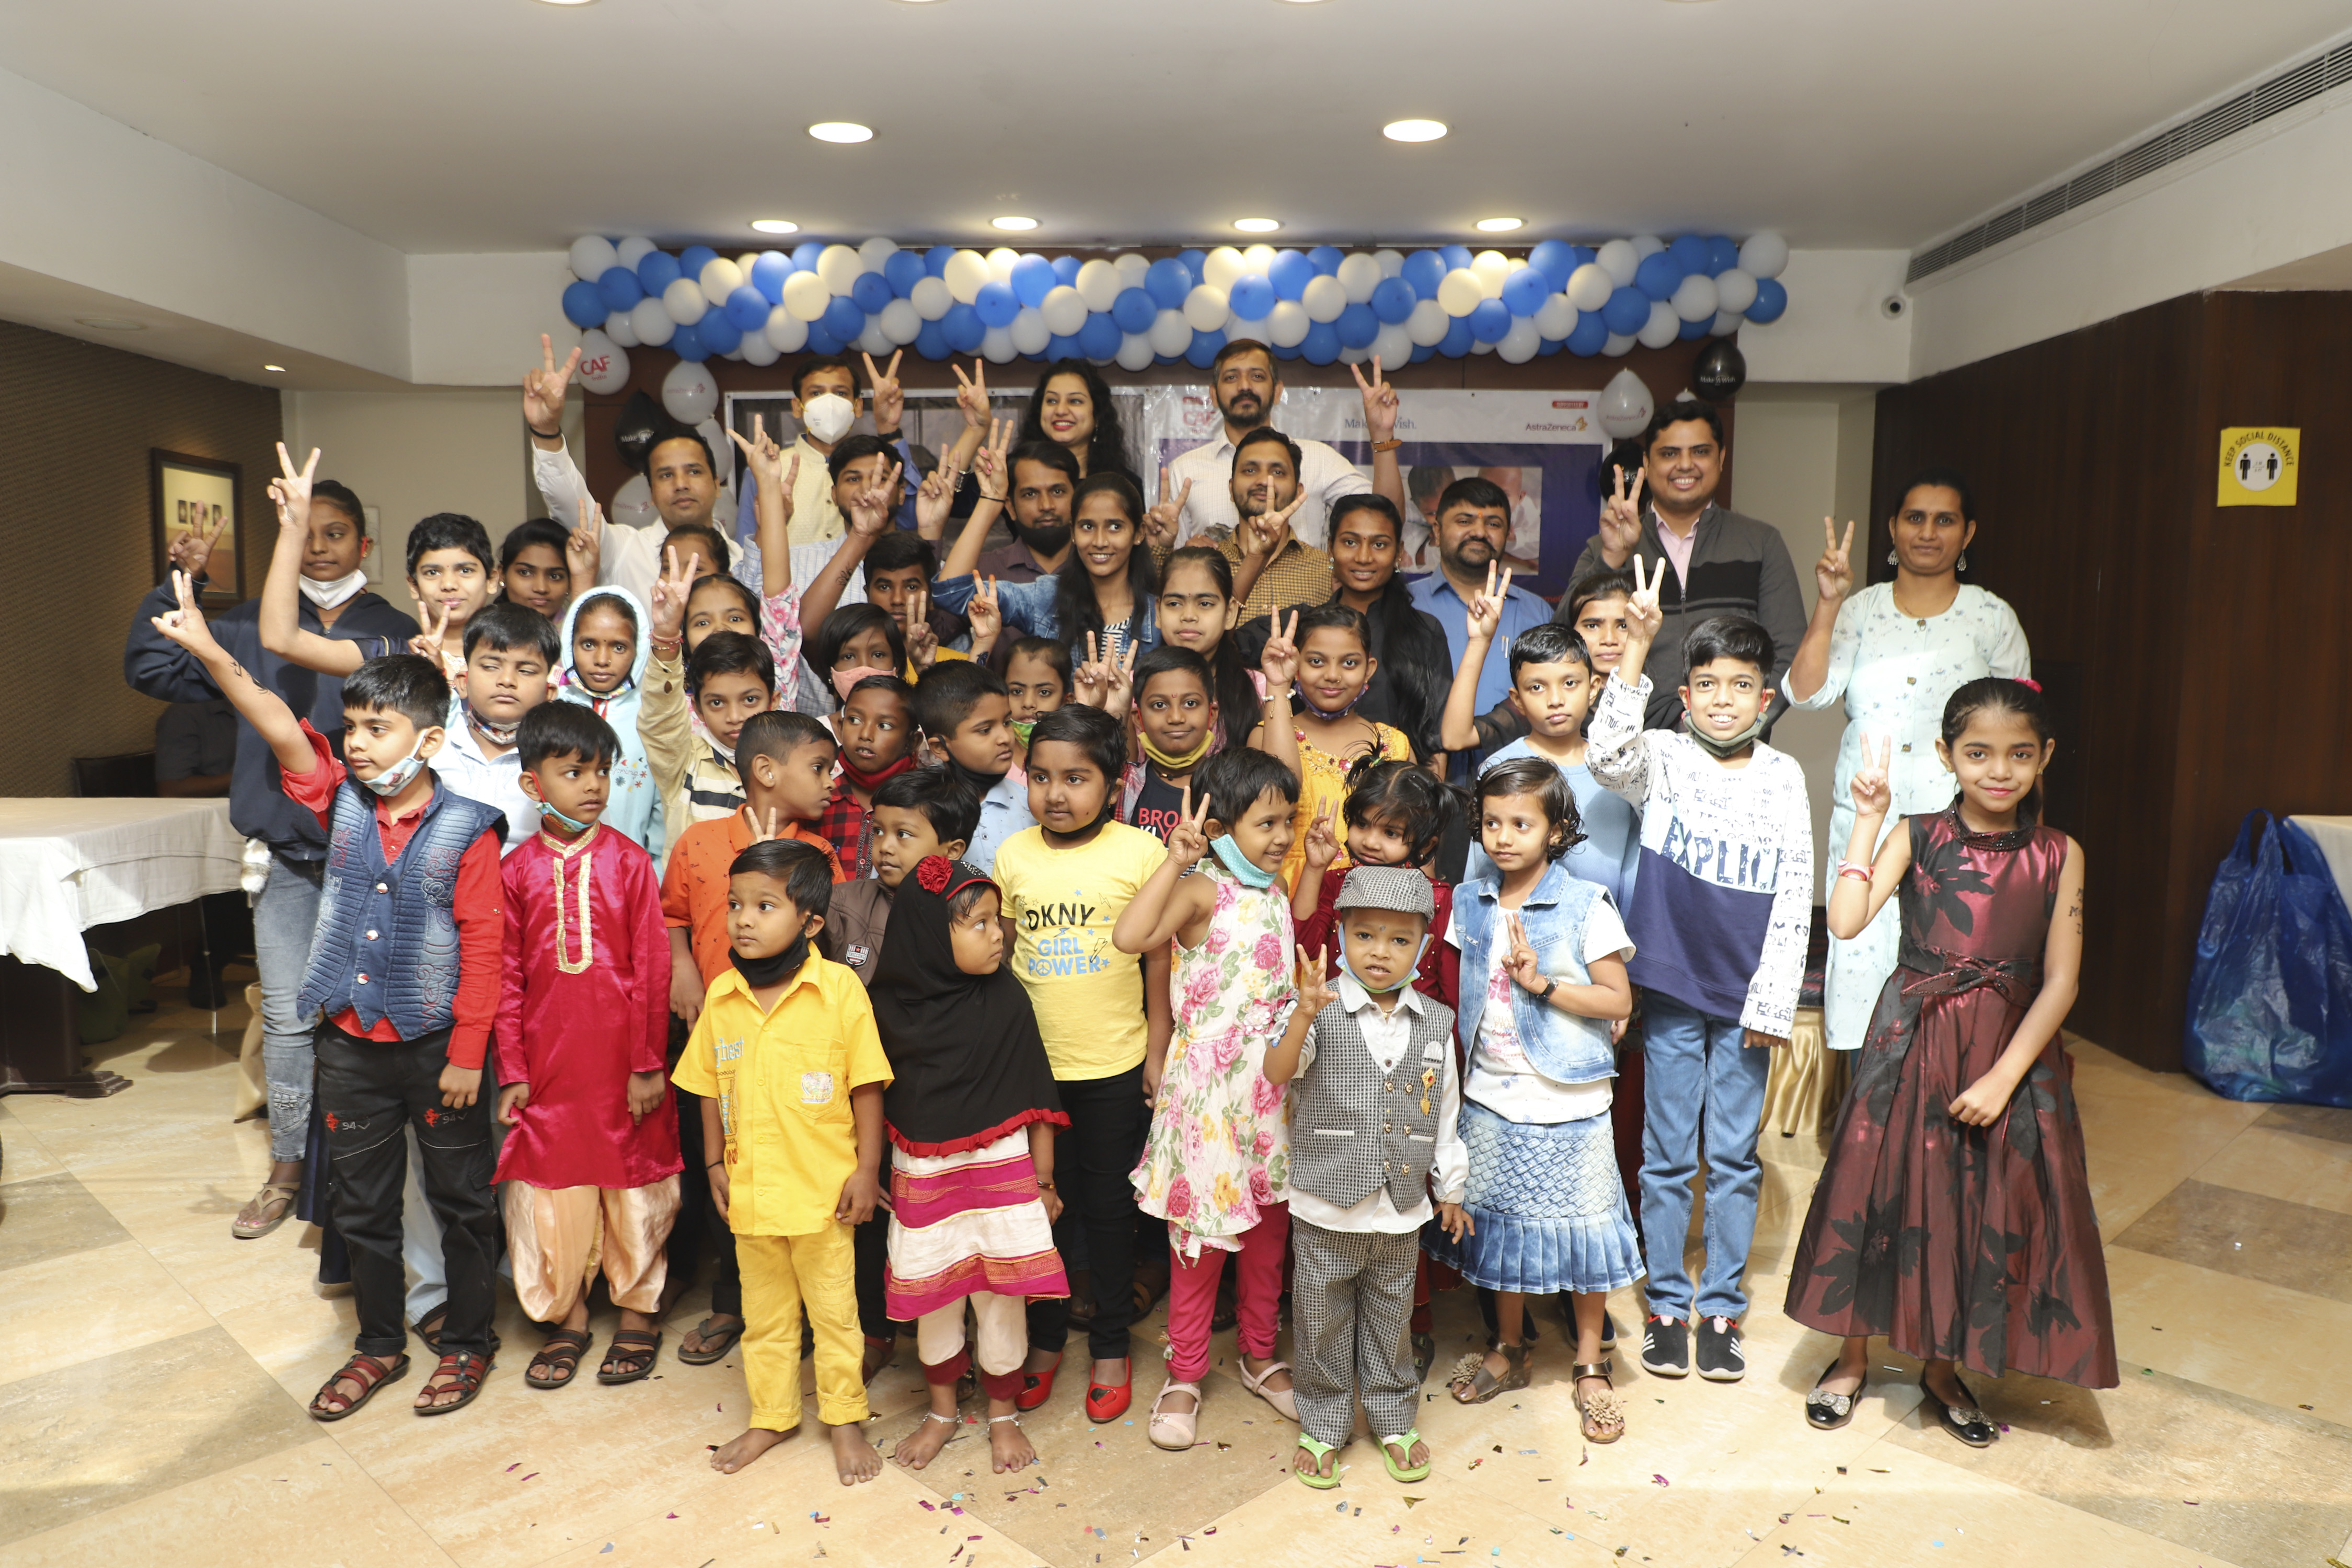 AstraZeneca India grants 500 wishes to critically ill children by joining hands with 'Make-A-Wish' foundation